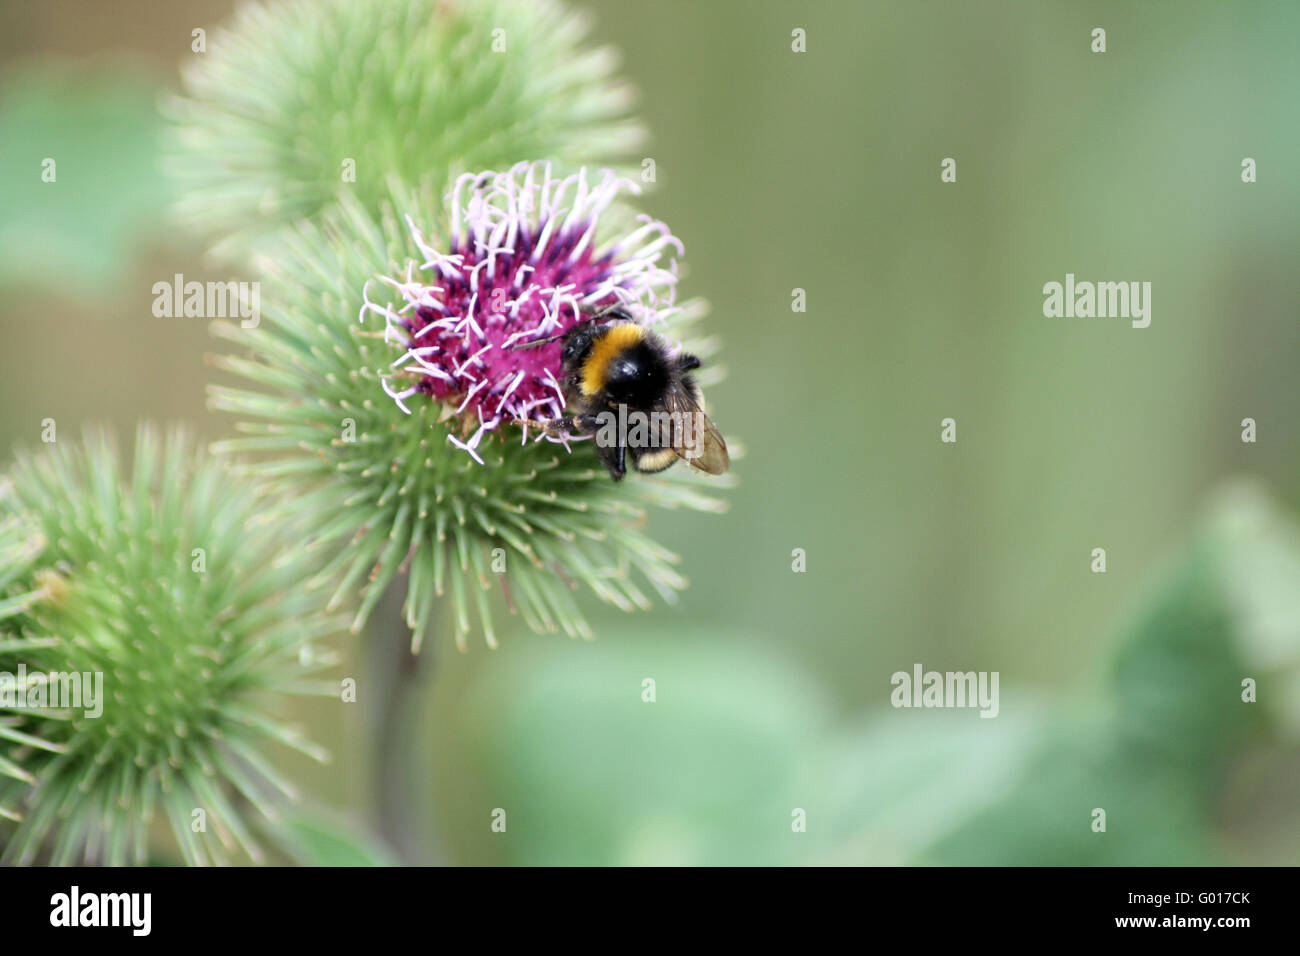 Bumble bee Banque D'Images